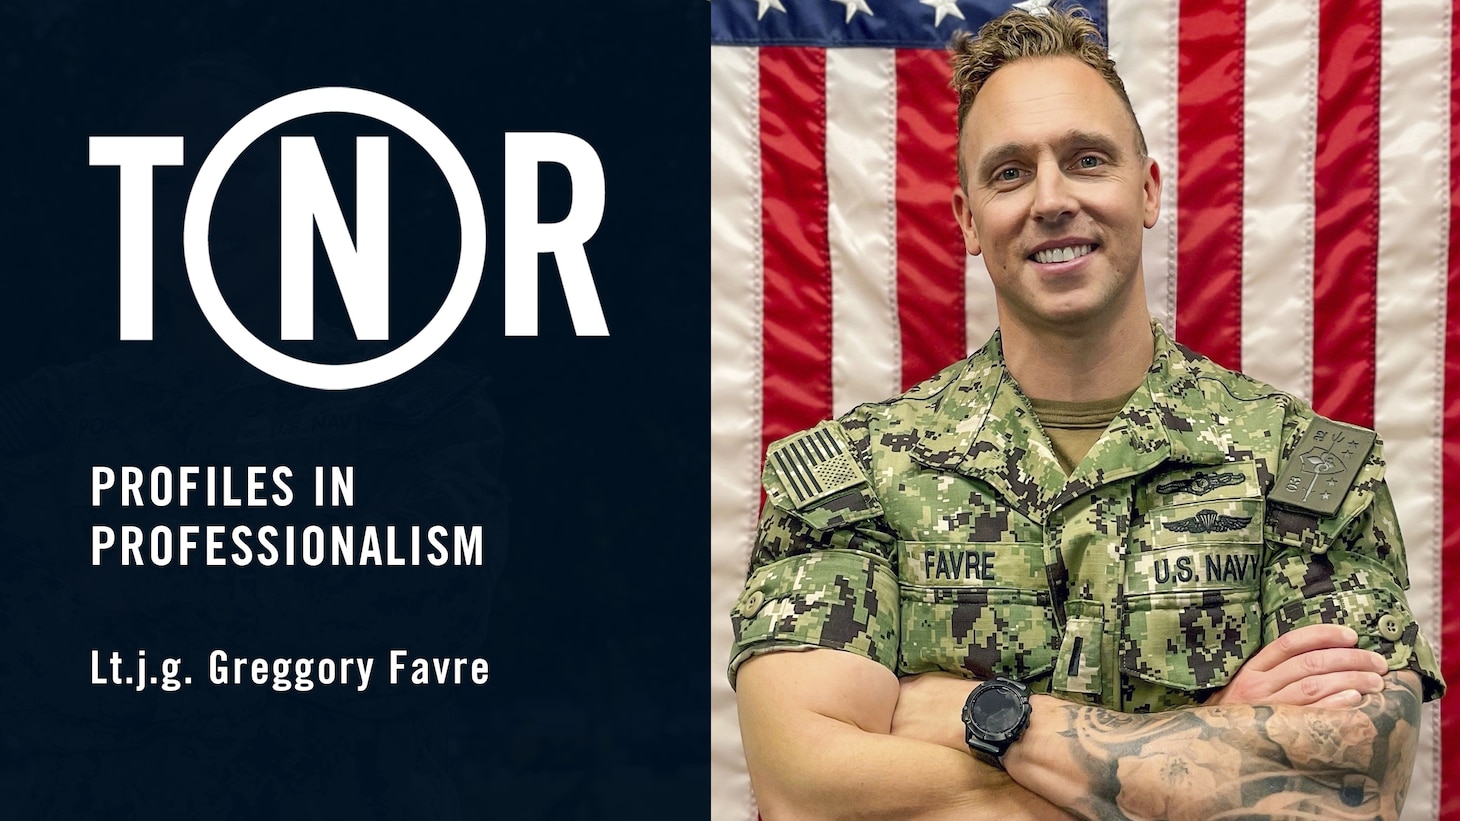 Navy Reserve Lt.j.g. Greggory Favre, a 41 year-old native of St. Louis, Missouri, is a fourth-generation military service member. His family’s dedicated service to the Nation spans more than 100 years.